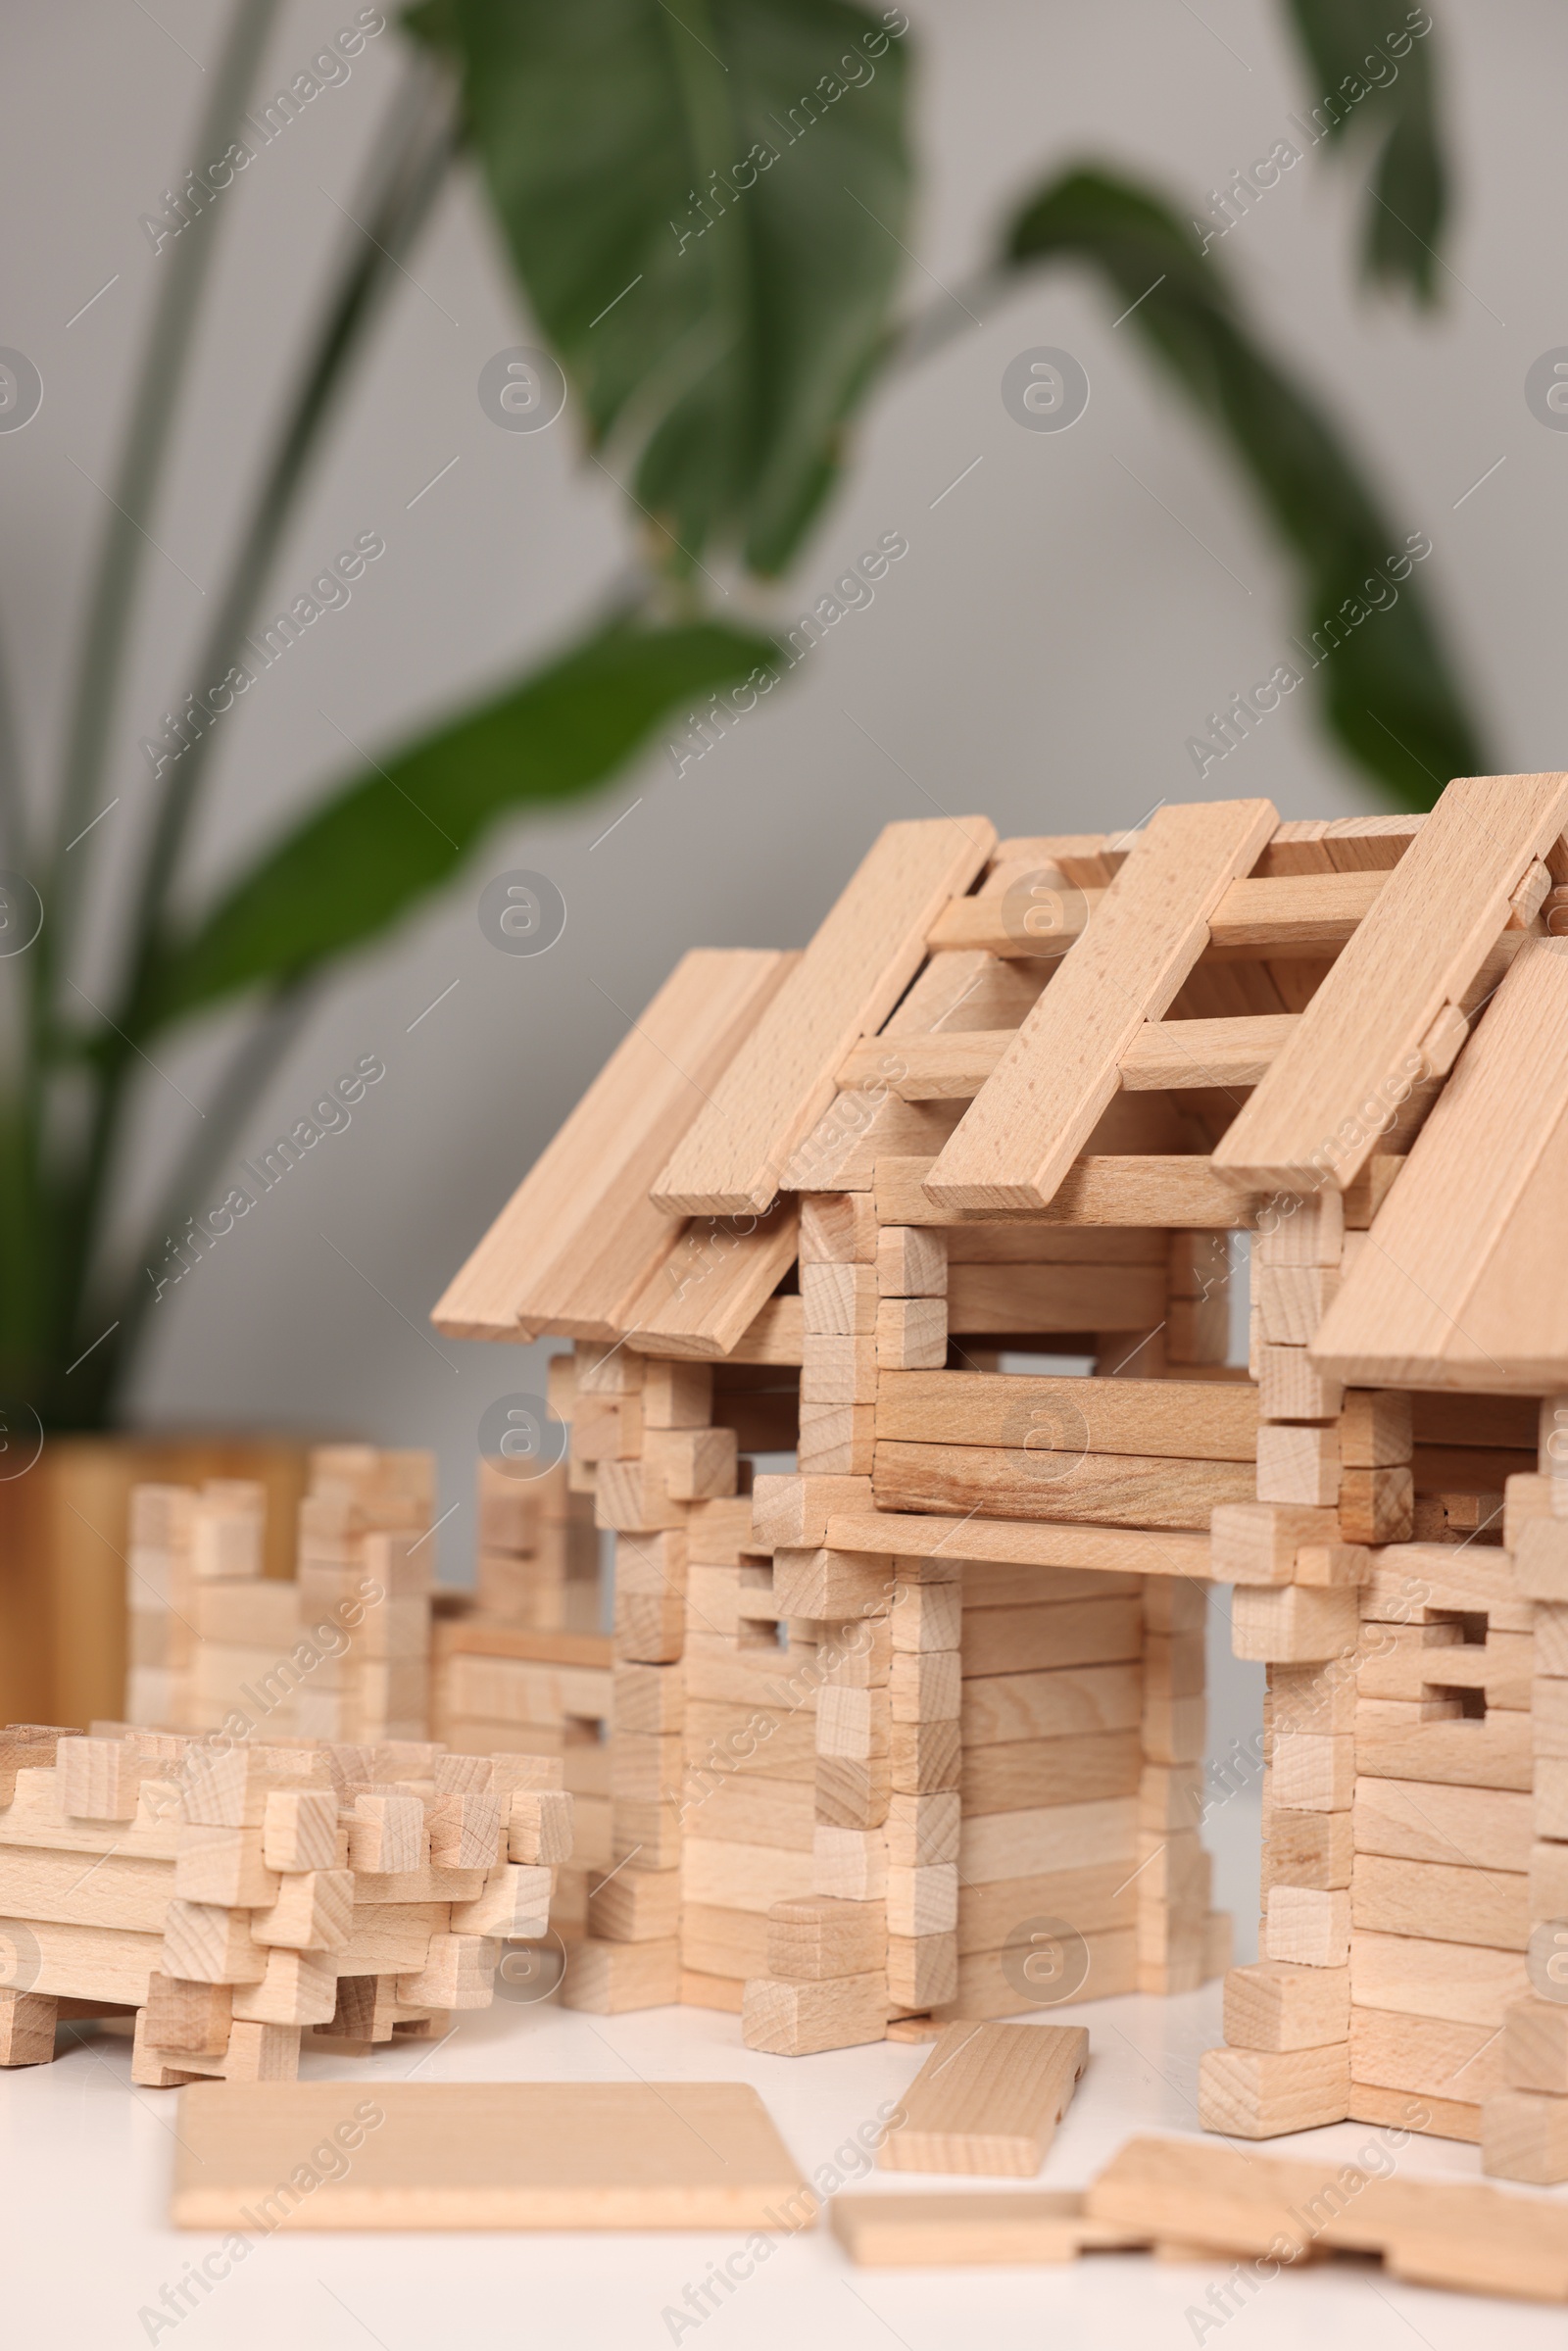 Photo of Wooden entry gate on white table against blurred background. Children's toy